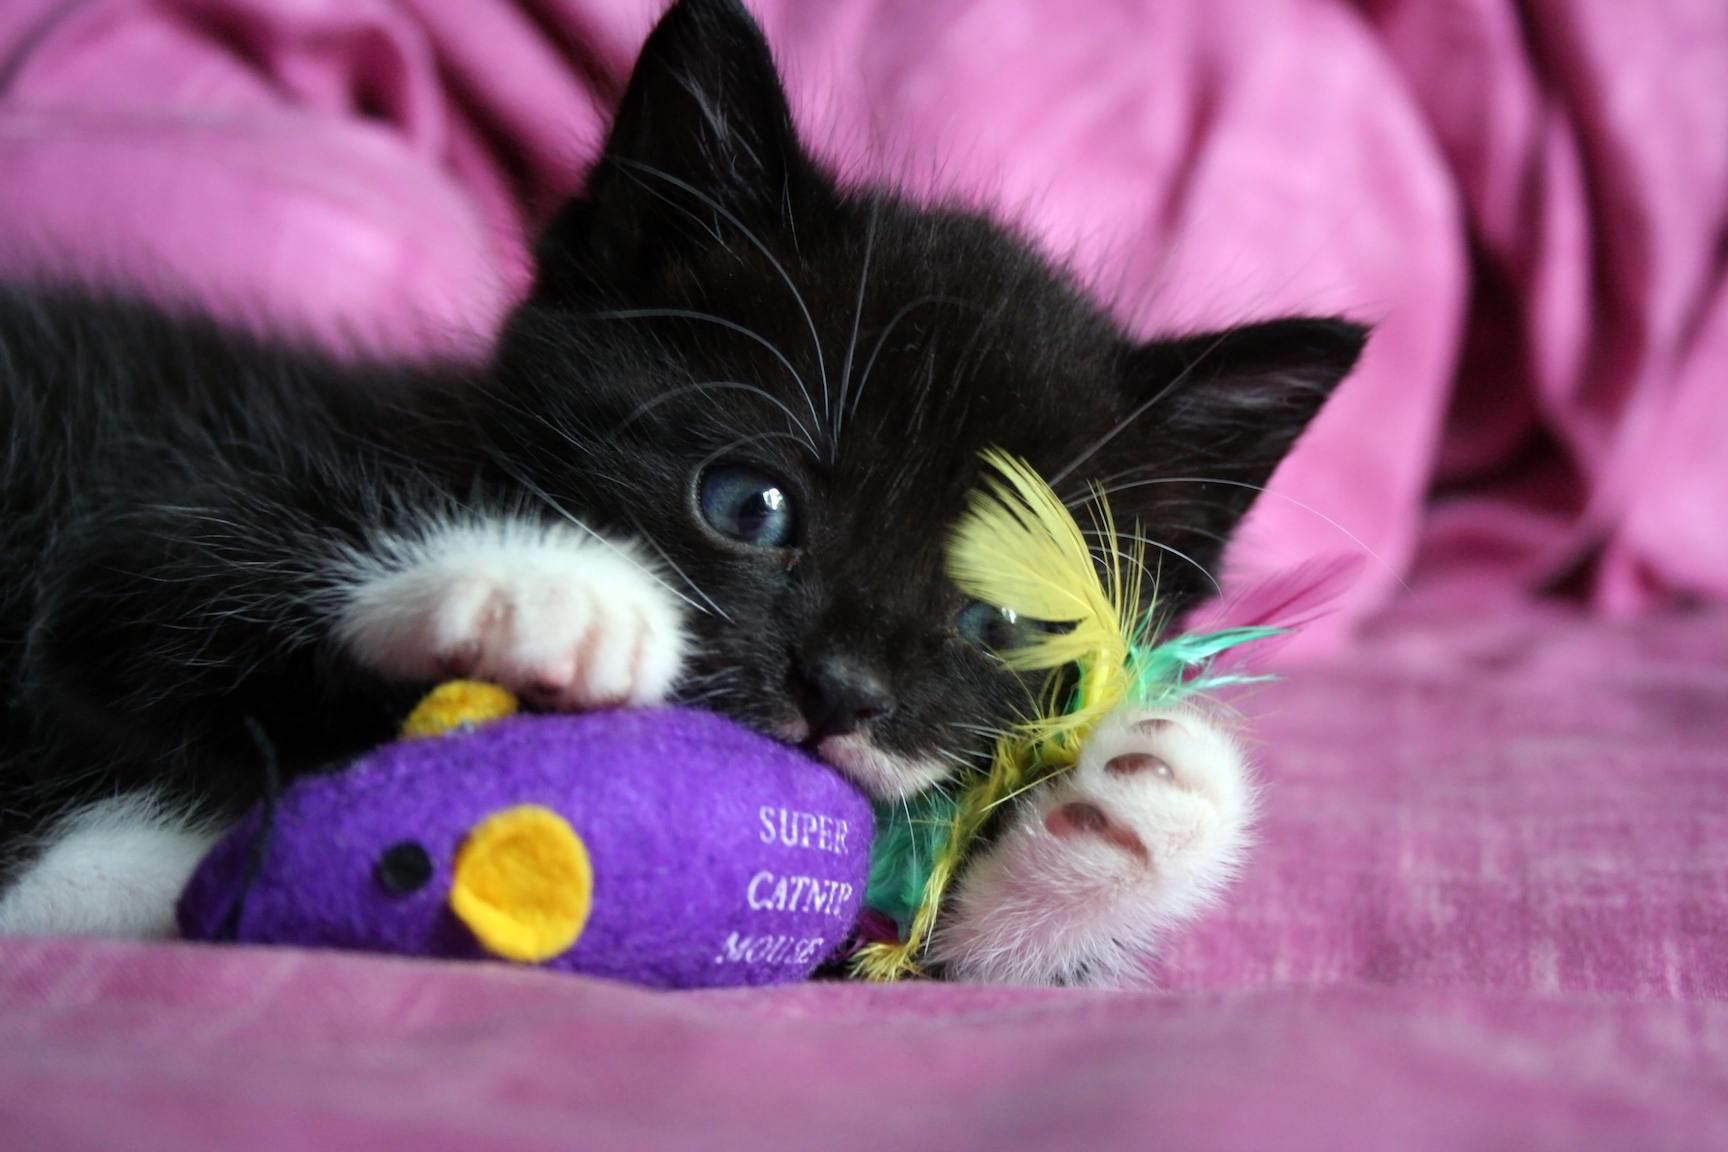 Kitten playing with catnip mouse toy